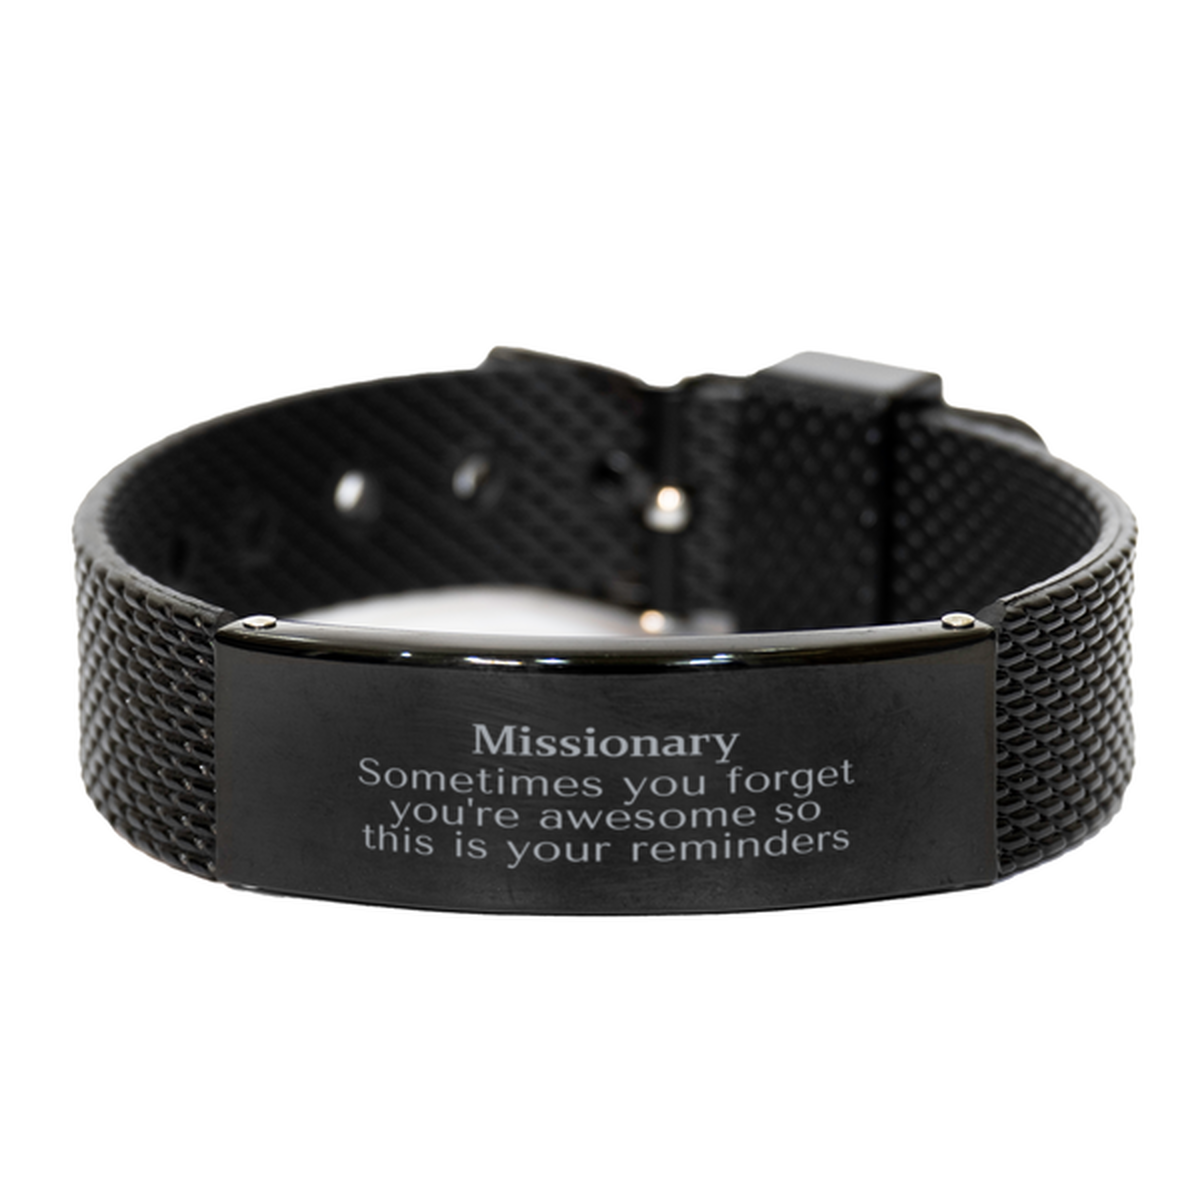 Sentimental Missionary Black Shark Mesh Bracelet, Missionary Sometimes you forget you're awesome so this is your reminders, Graduation Christmas Birthday Gifts for Missionary, Men, Women, Coworkers